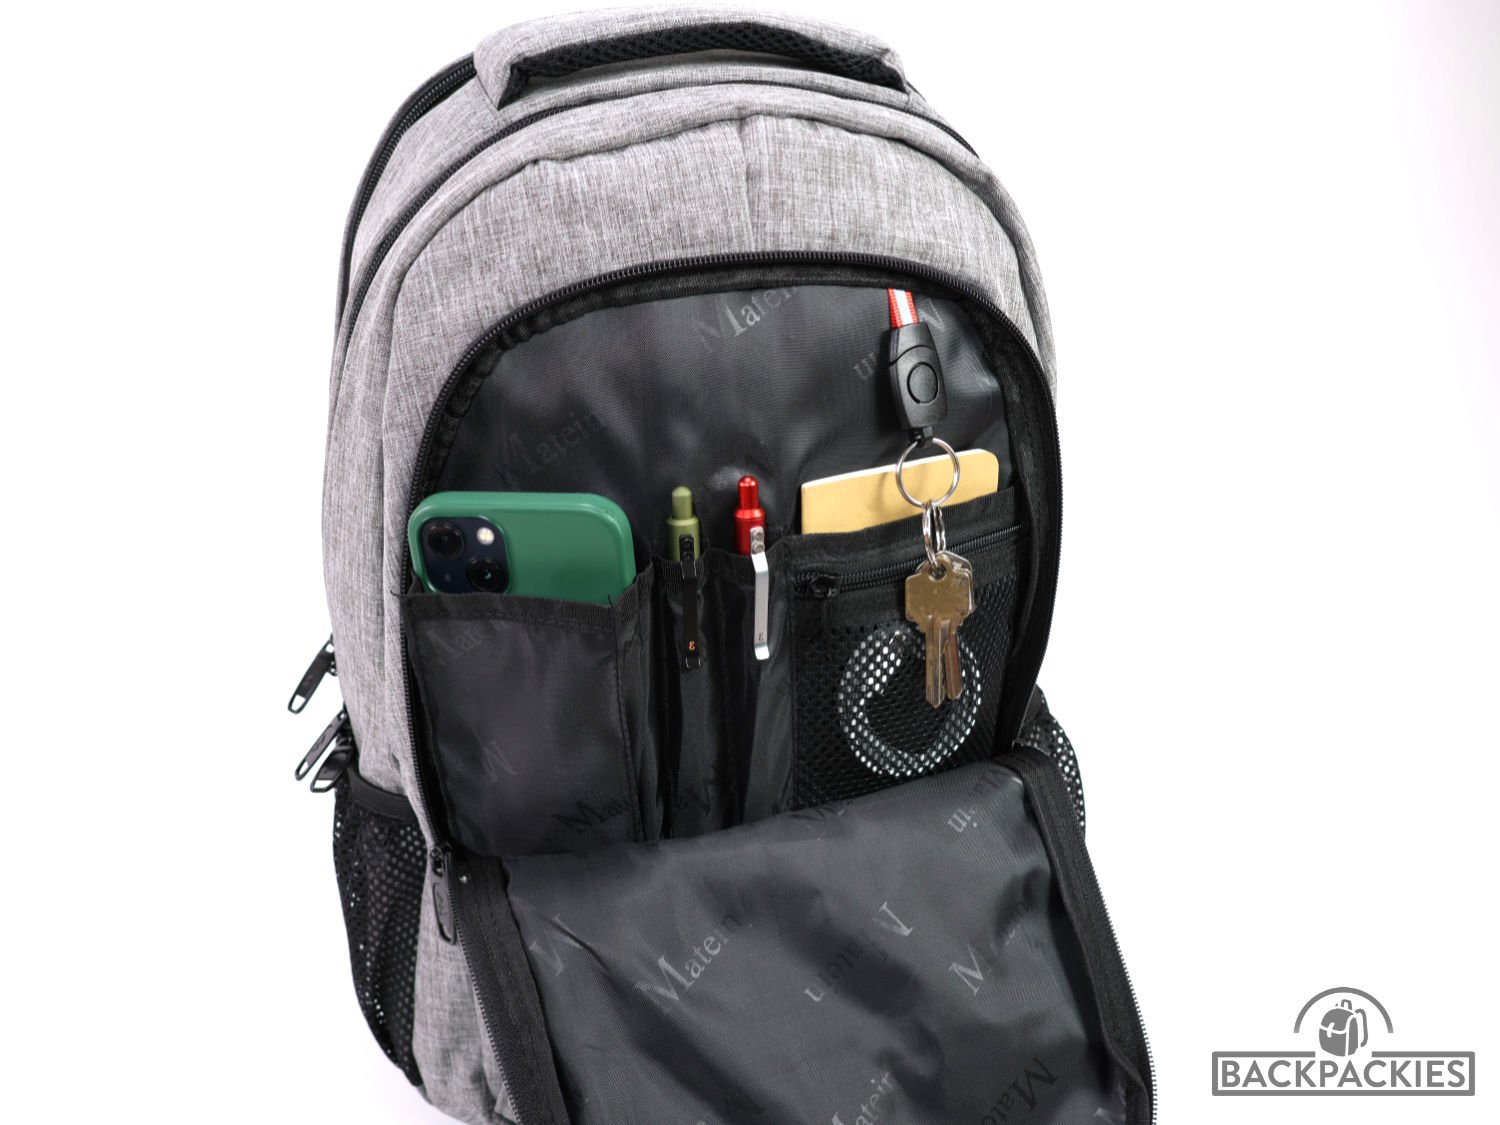 Matein Travel Laptop Backpack review